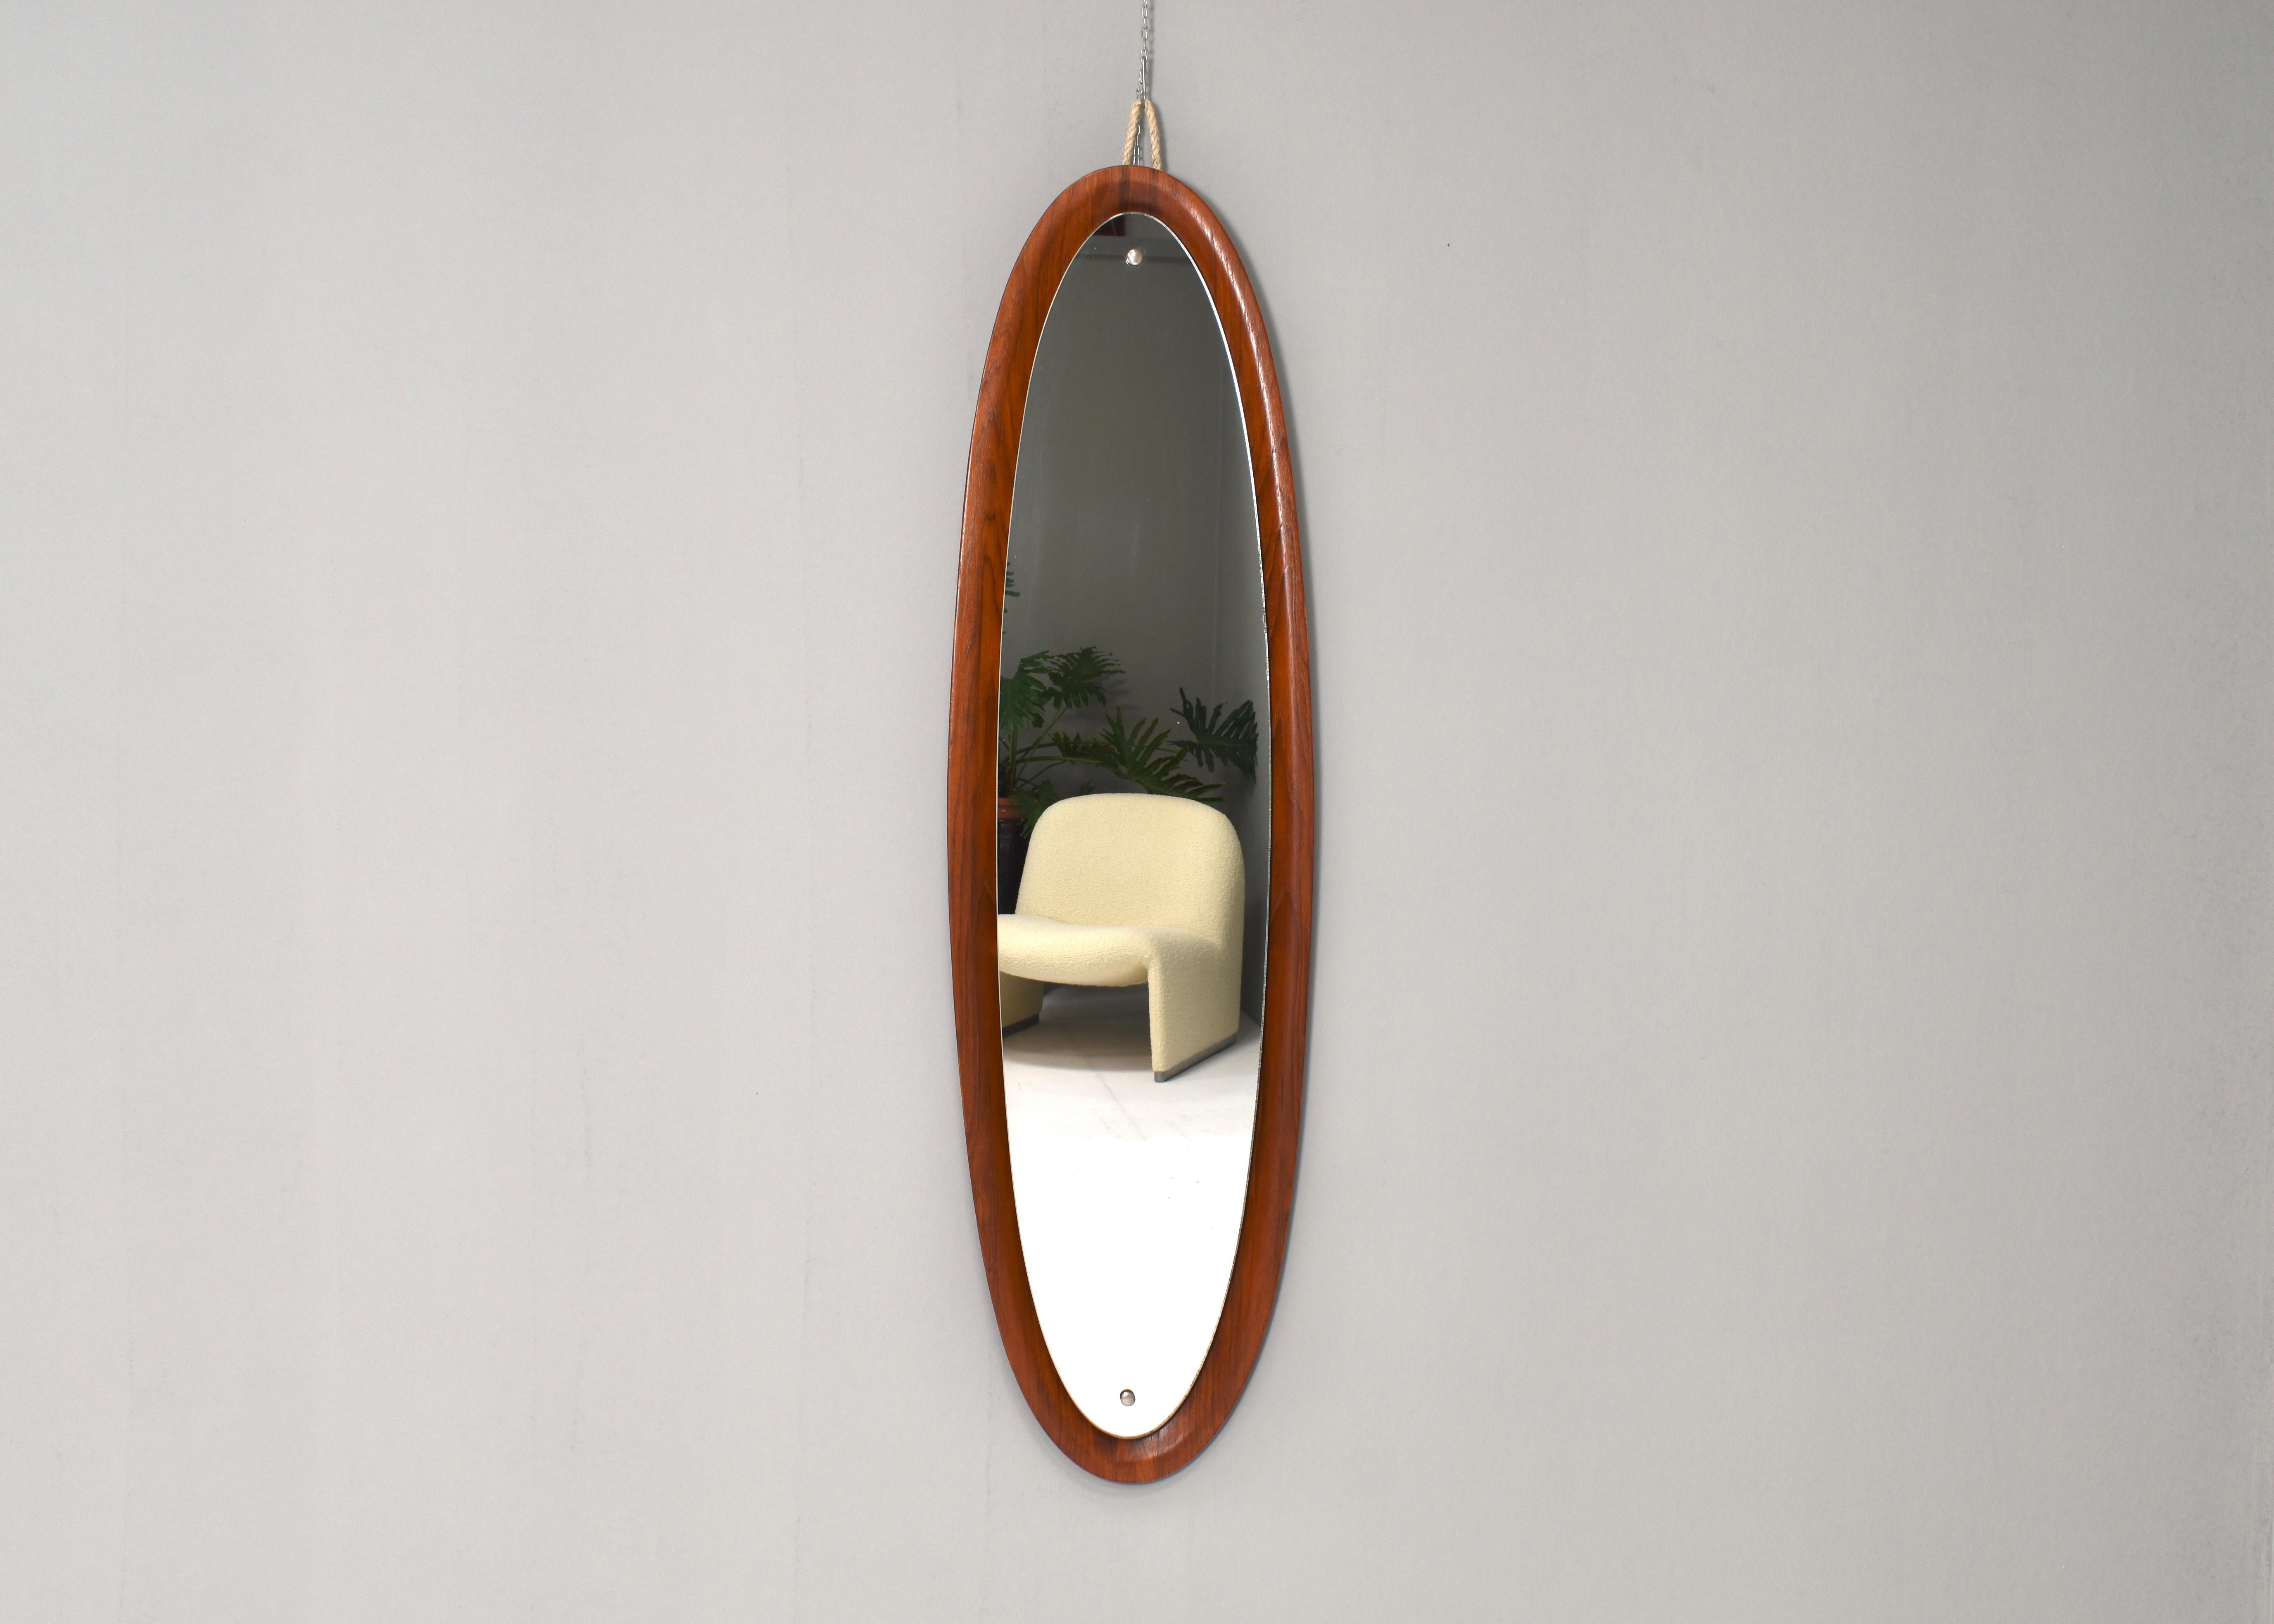 Large oval mirror in bent plywood teak and chrome details – Italy, circa 1950.
Very good condition.
Designer: Unknown
Manufacturer: Mac Arredamenti Meda Seveso
Country: Italy
Model: Mirror
Design period: circa 1950
Date of manufacturing: circa